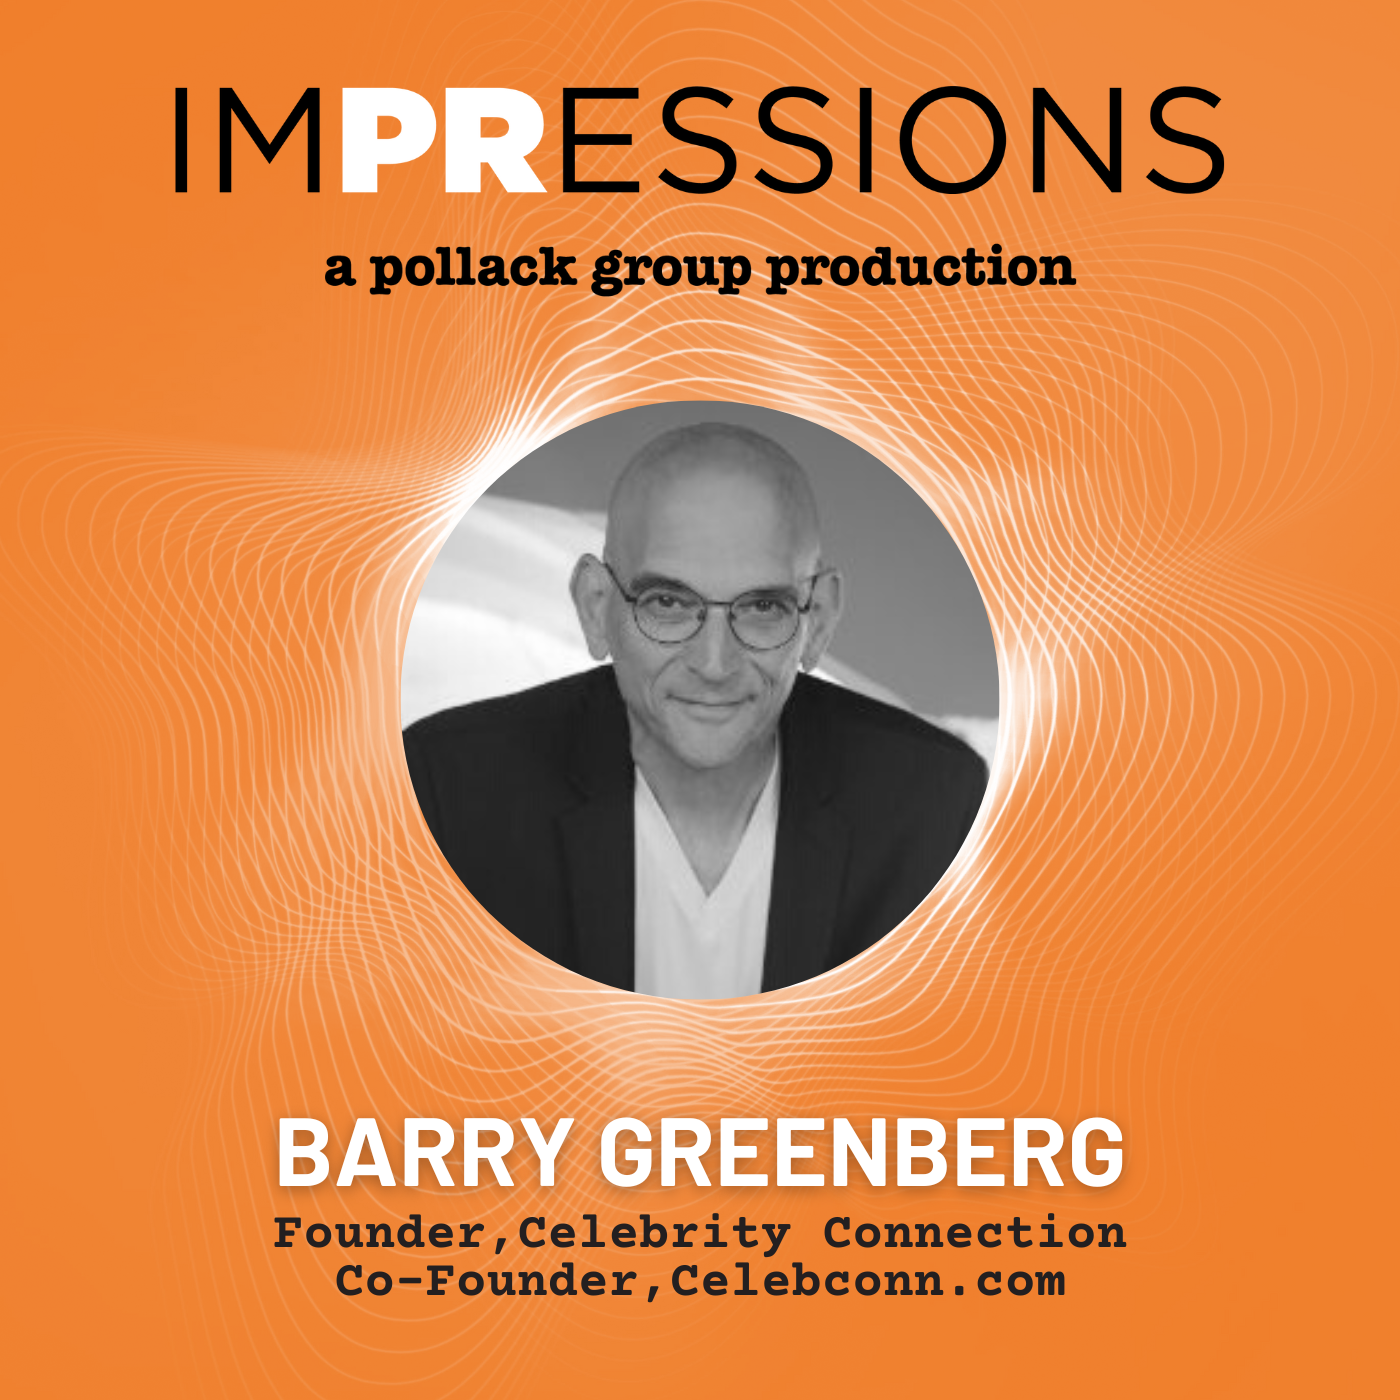 Promotional graphic for Impressions with portrait of Barry Greenberg